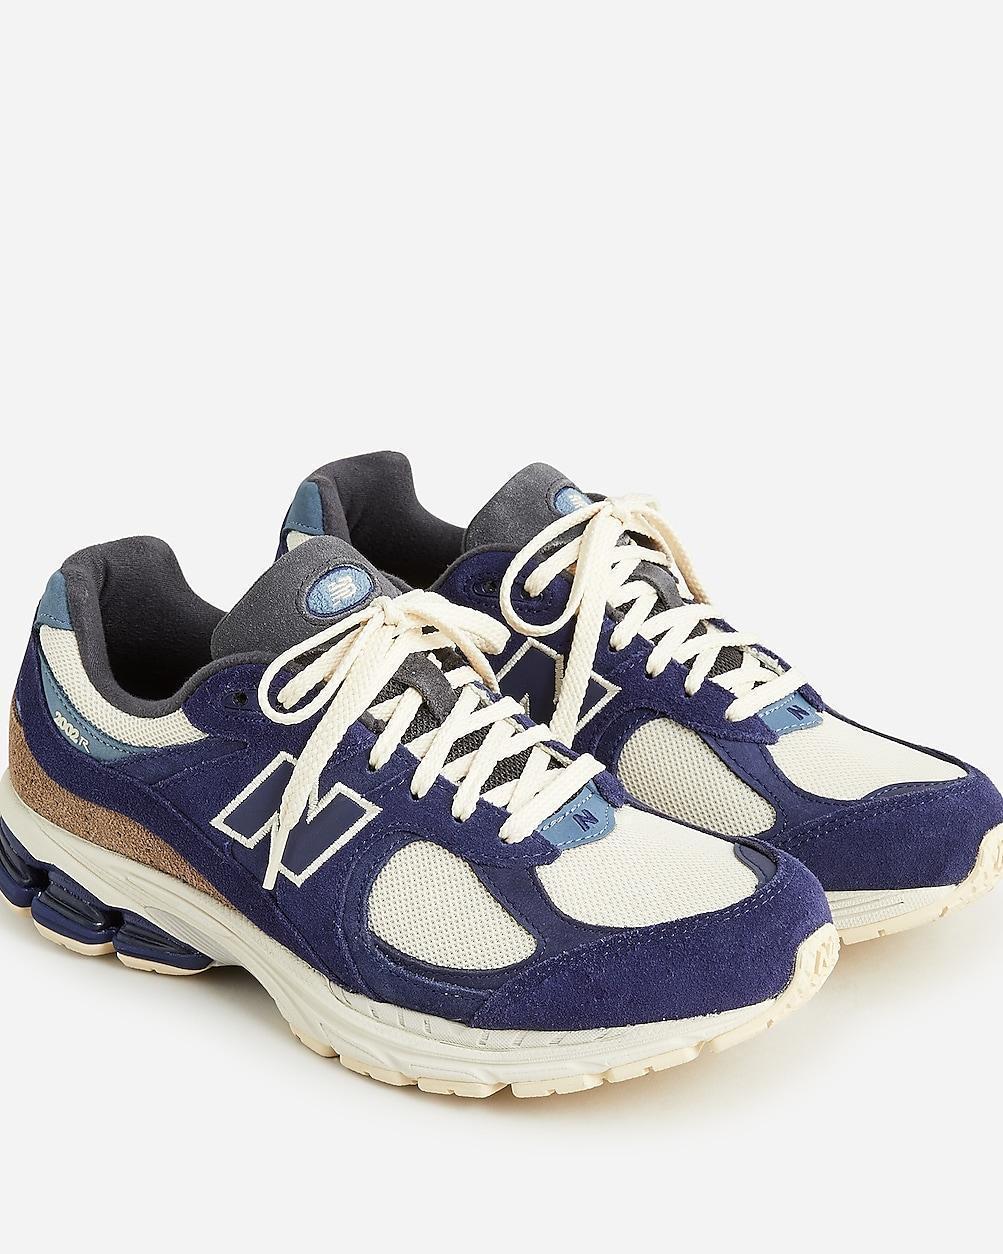 New Balance® 2002R sneakers Product Image